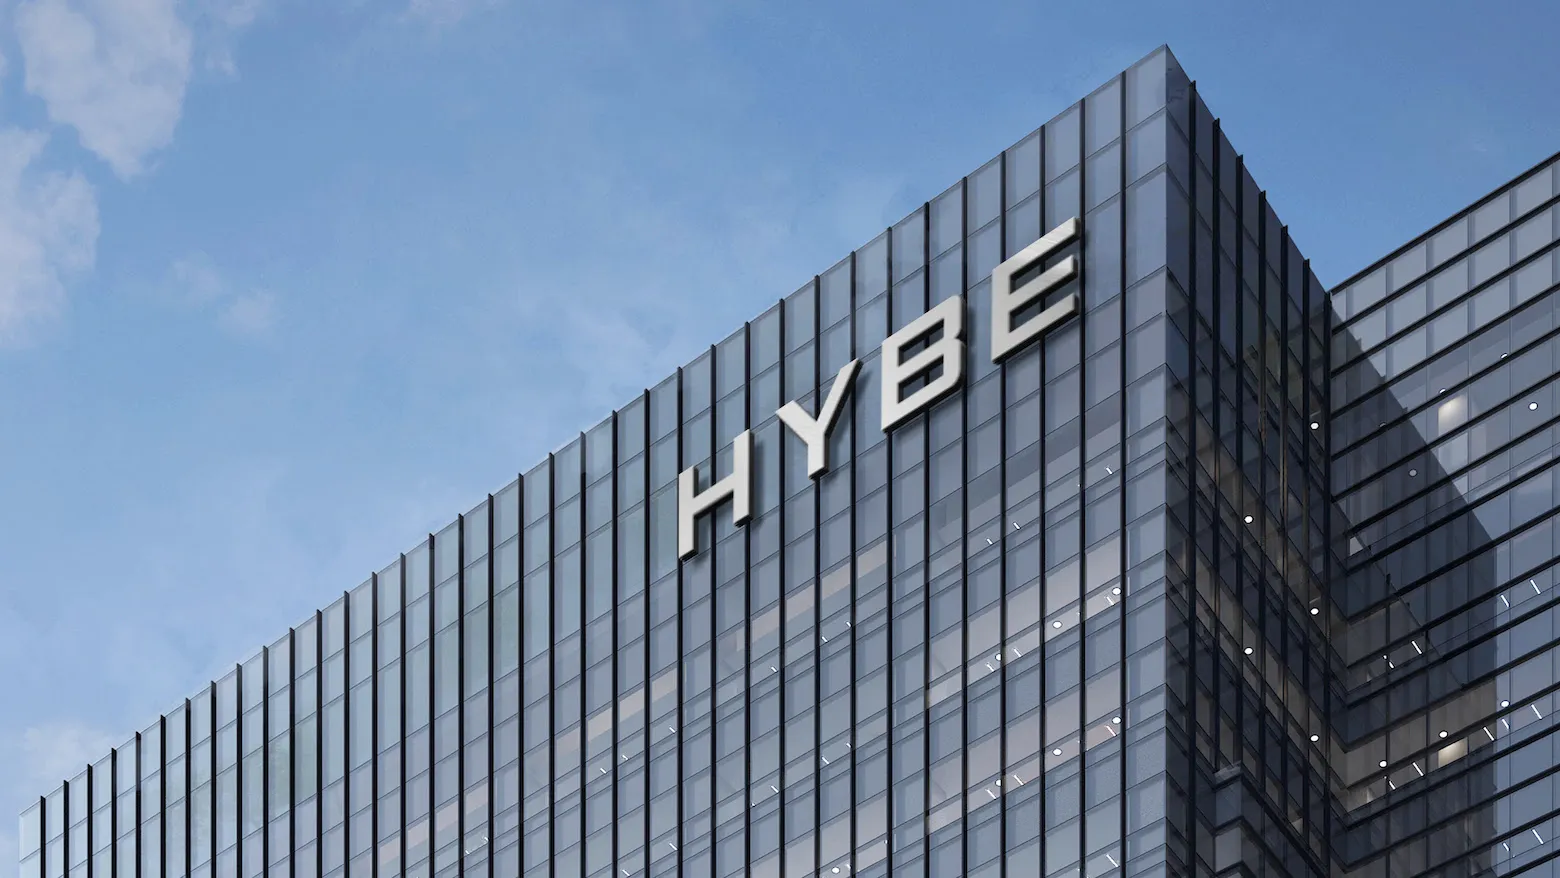 Hybe Entertainment take legal Action Against illegal Sale of Artist Flight Information